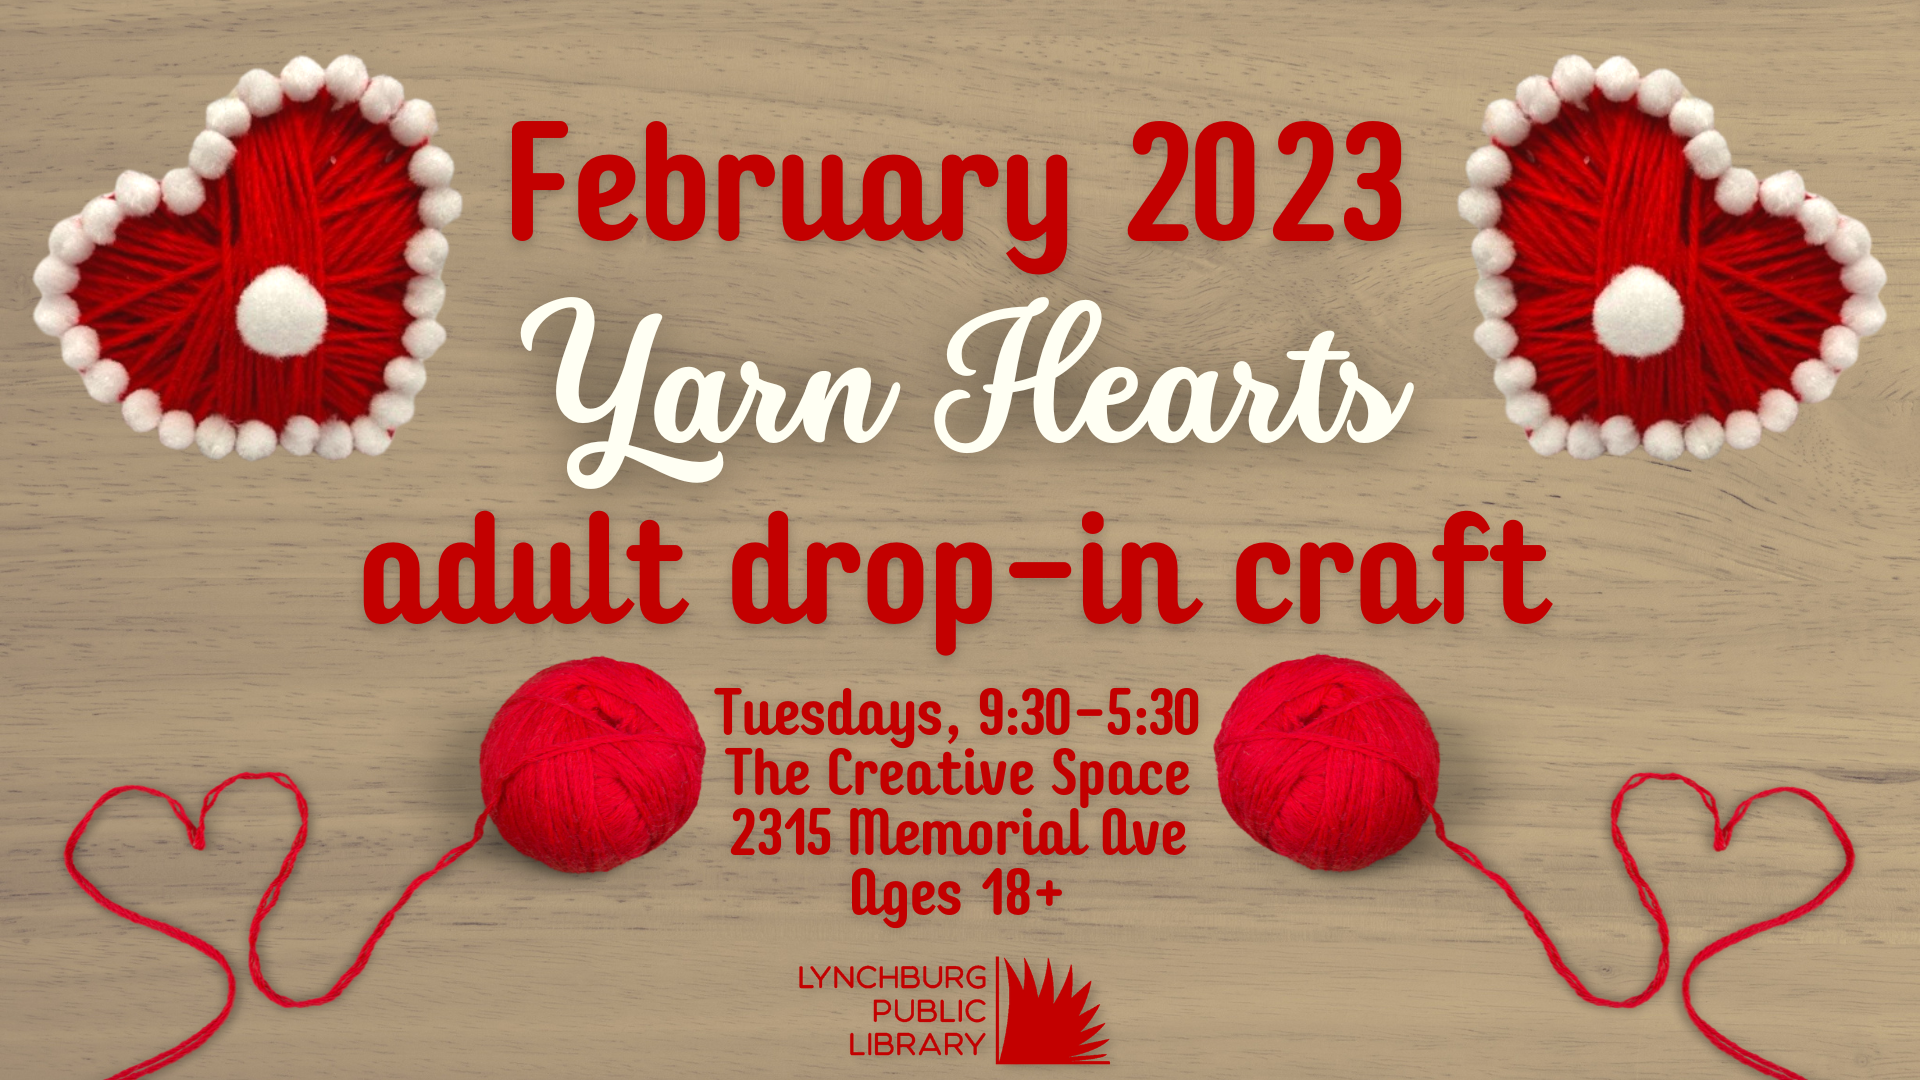 February 2023 adult drop-in craft; yarn hearts; tuesdays 9:30-5:30, the creative space, 2315 memorial ave, ages 18+